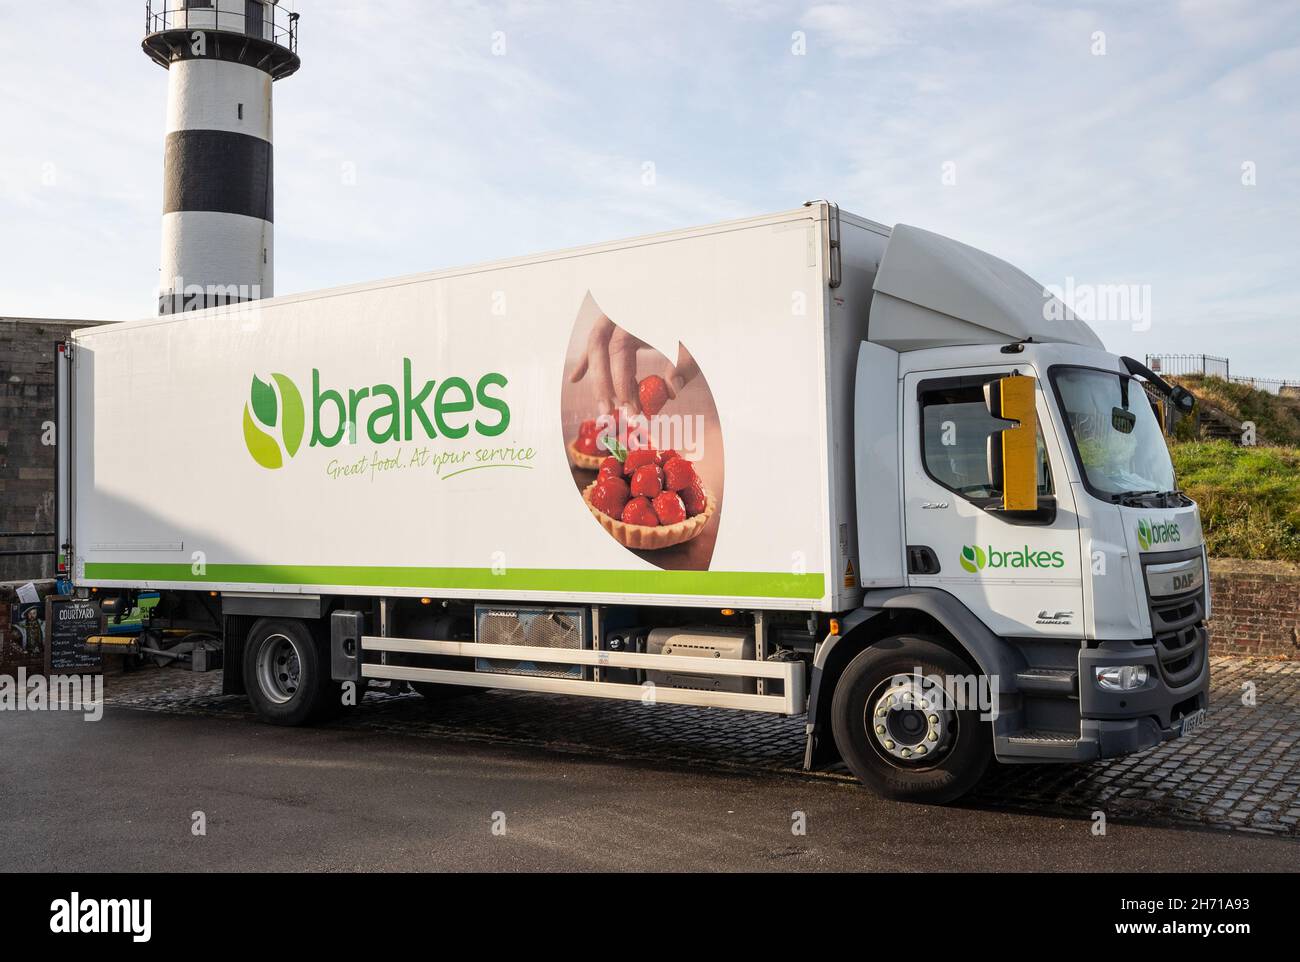 Brakes catering delivery truck making a delivery in Portsmouth, Hampshire, UK Stock Photo